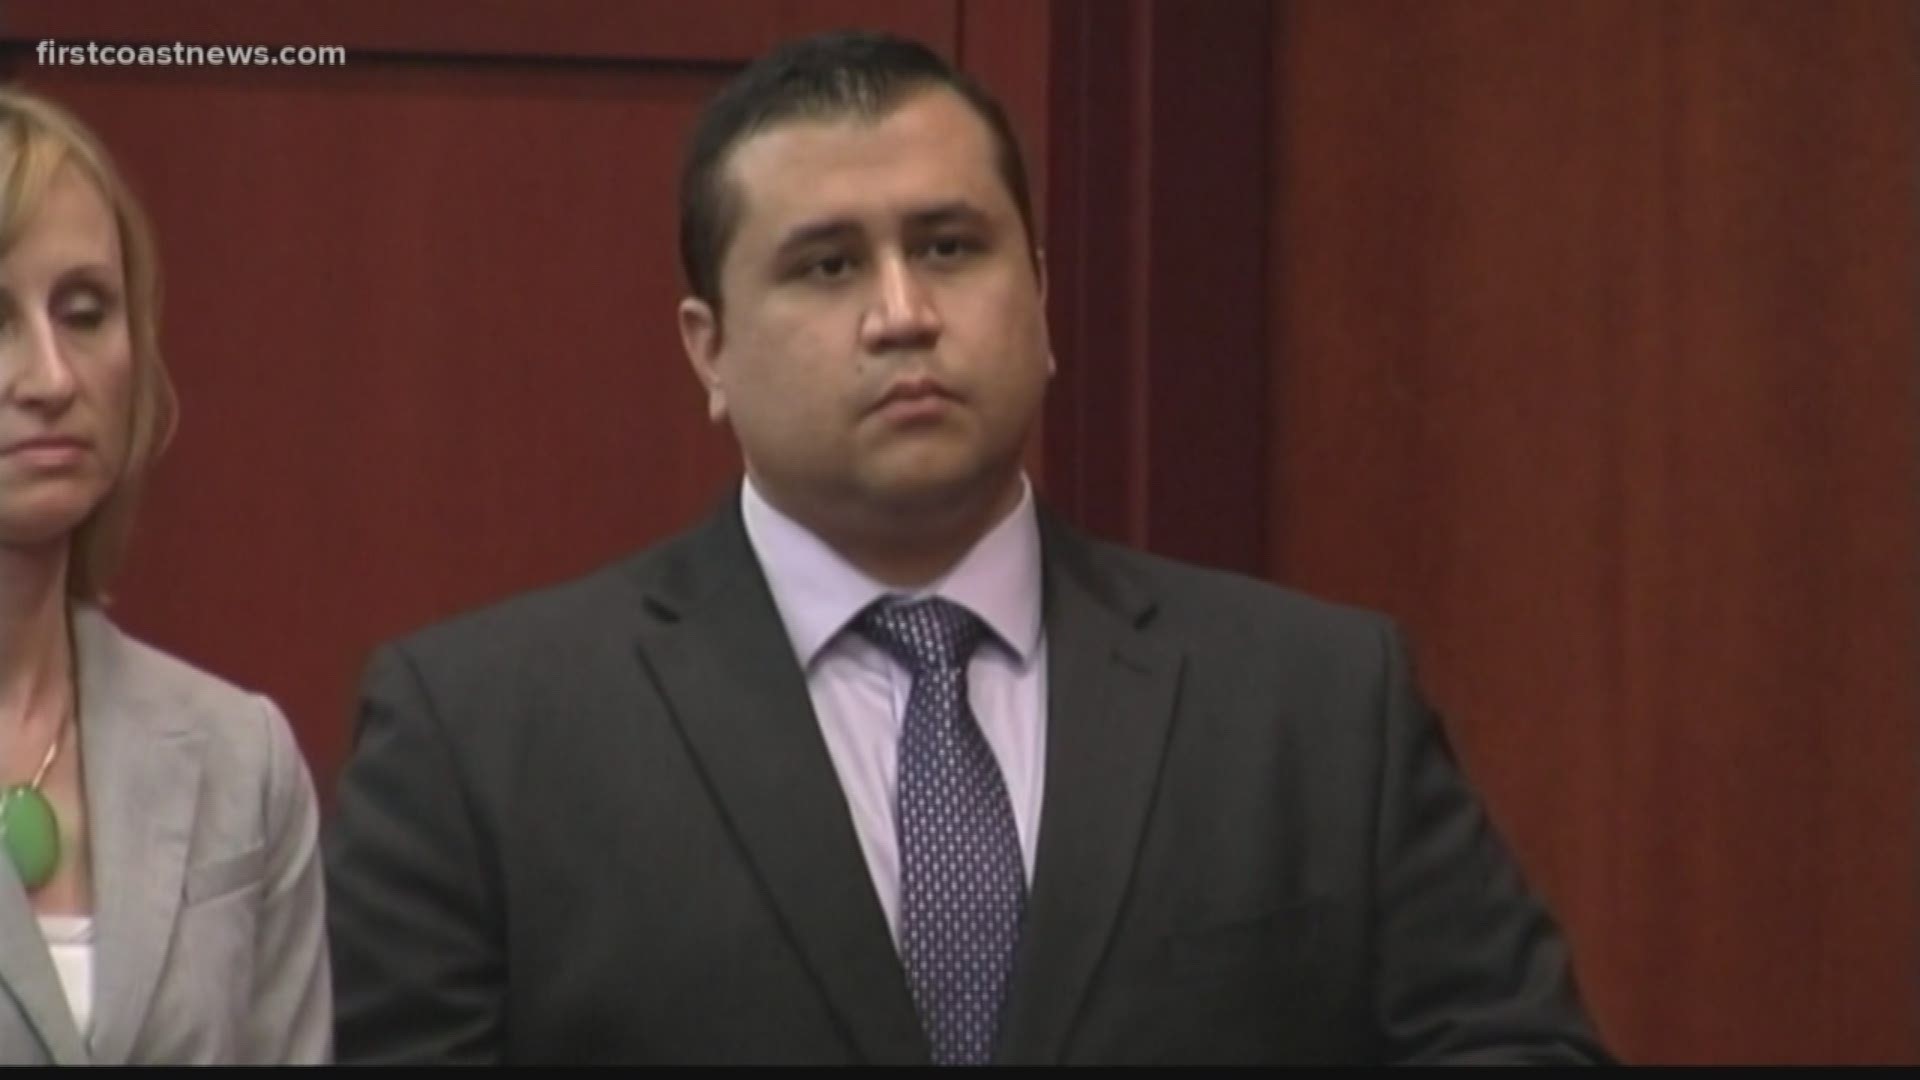 Zimmerman is suing the Martin family, their attorney and the Florida prosecutors who brought him to trial – for $100 million dollars.